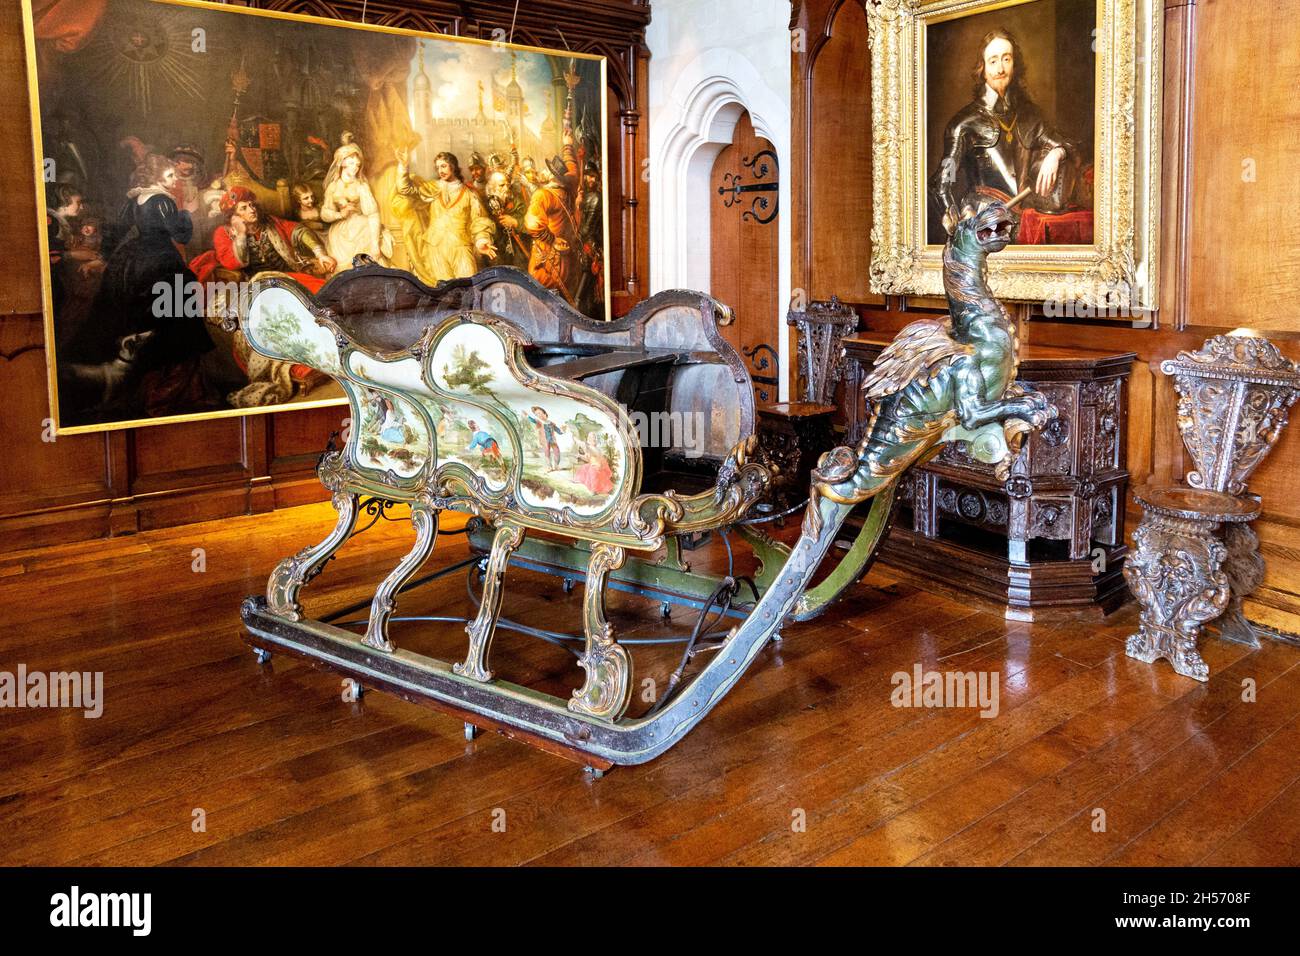 Ornate sleigh with dragon inside The Barons' Hall, Arundel Castle, West Sussex, UK Stock Photo